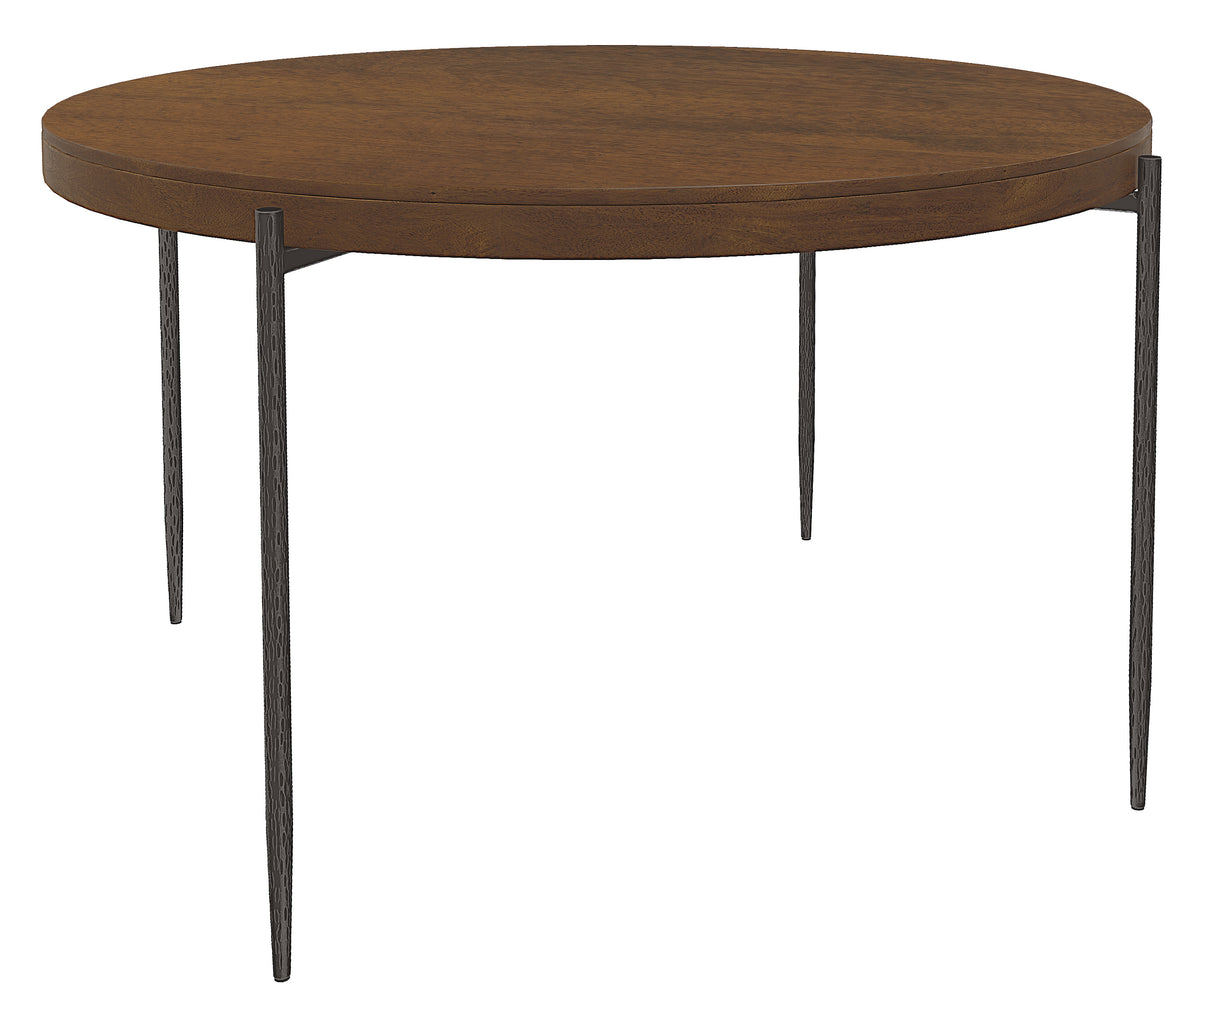 Hekman 26021 Bedford Park 56in. x 56in. x 30.5in. Dining Table